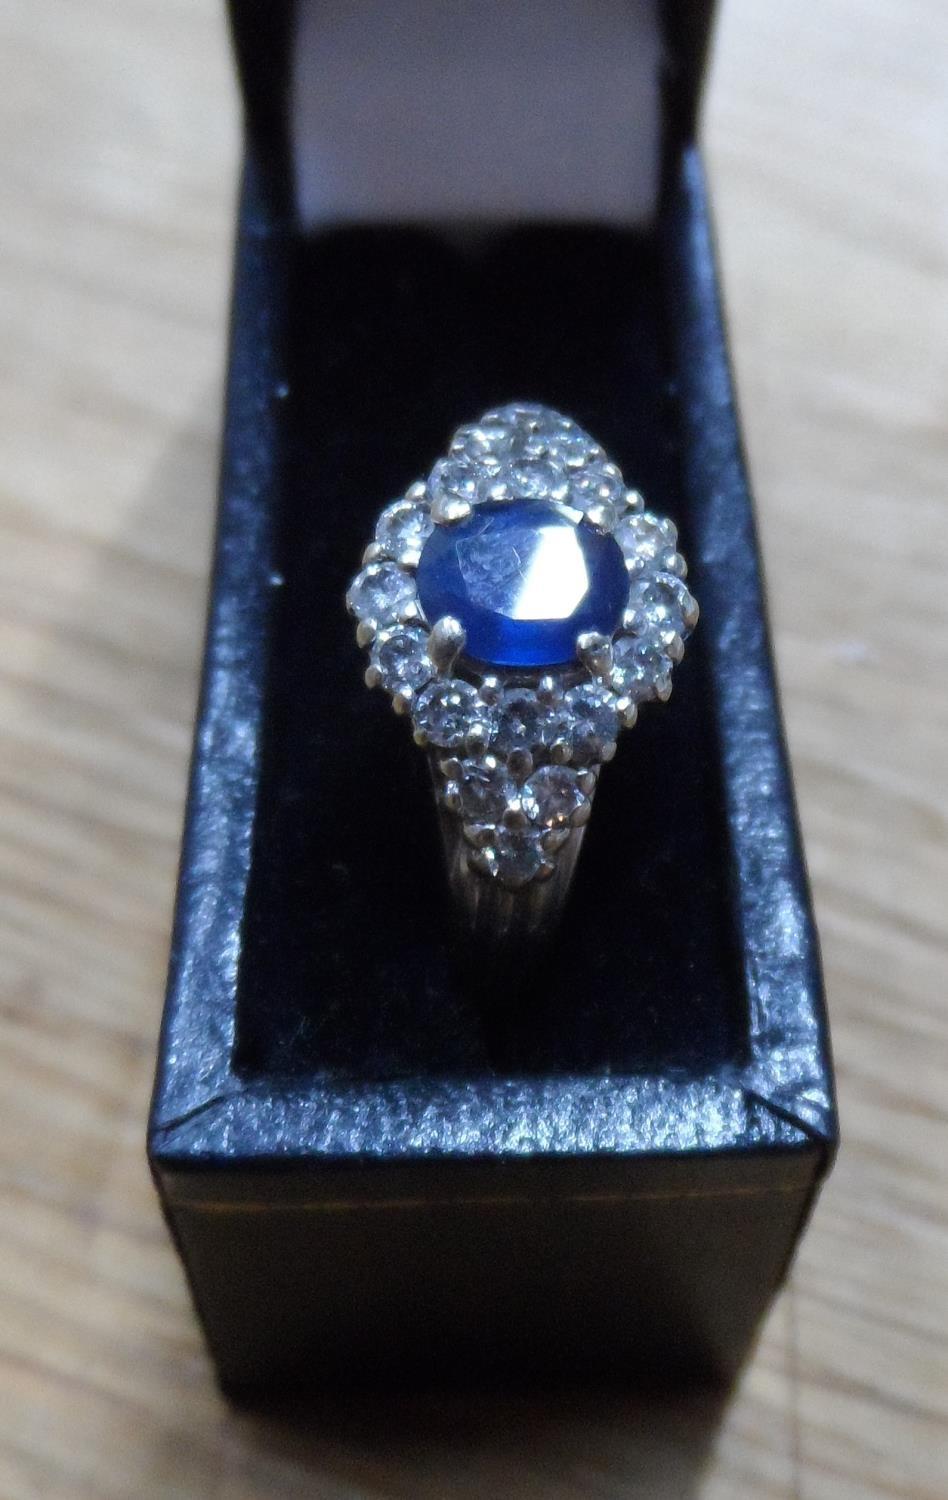 Fine quality, oval cut Sapphire surrounded by 18 round cut, high quality diamonds set in white